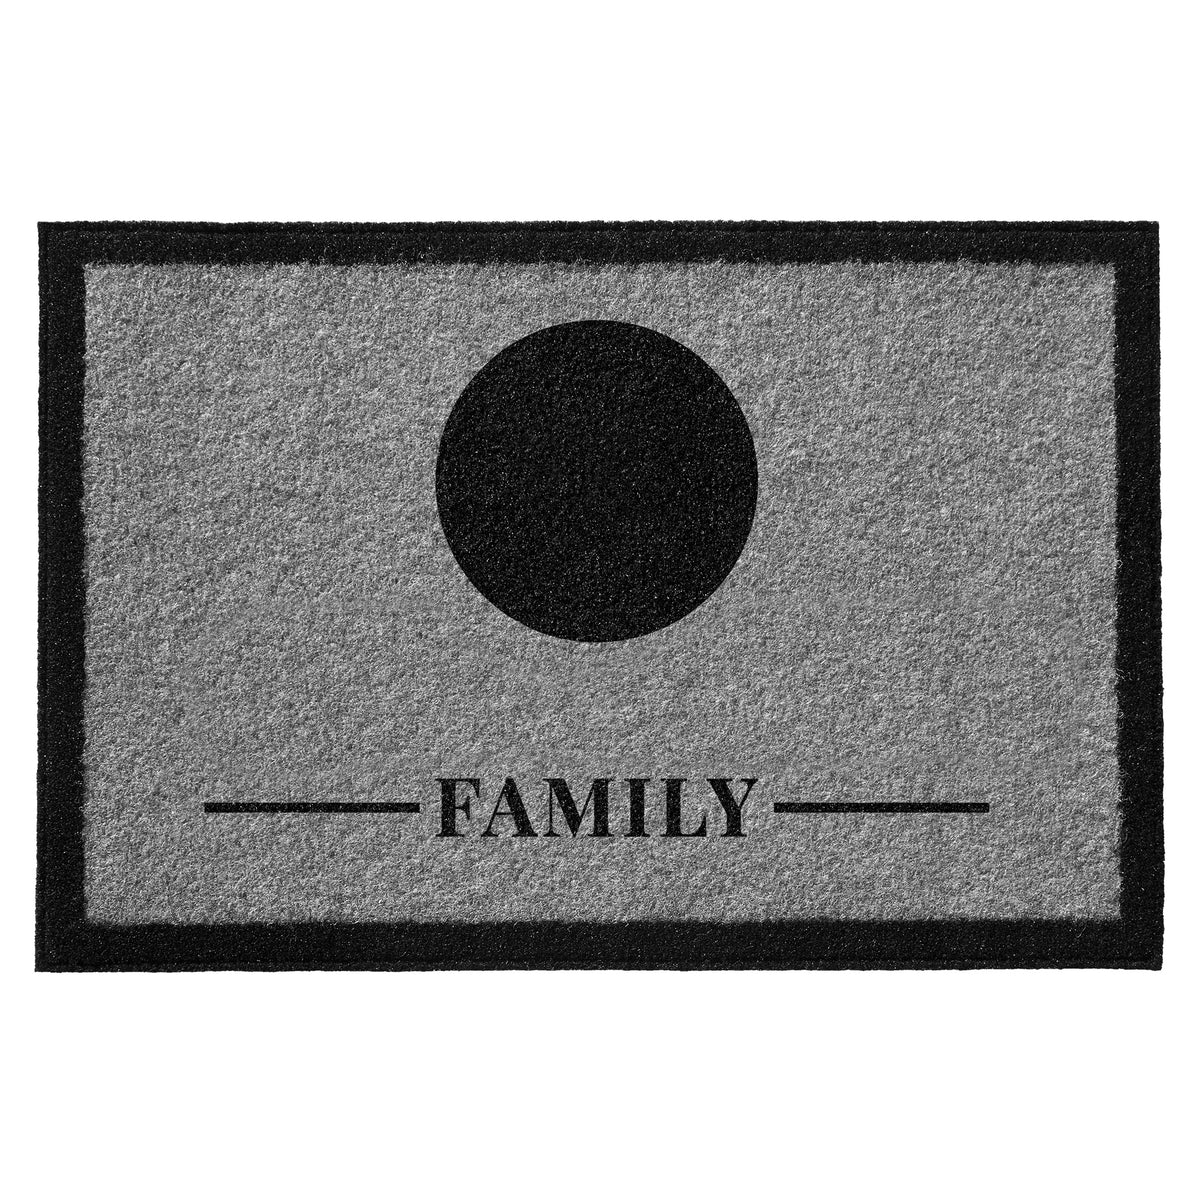 Custom Mats™ All-Weather Personalized Doormat - STYLE: CIRCLE COLOR: GREY / BLACK - rugsthatfit.com